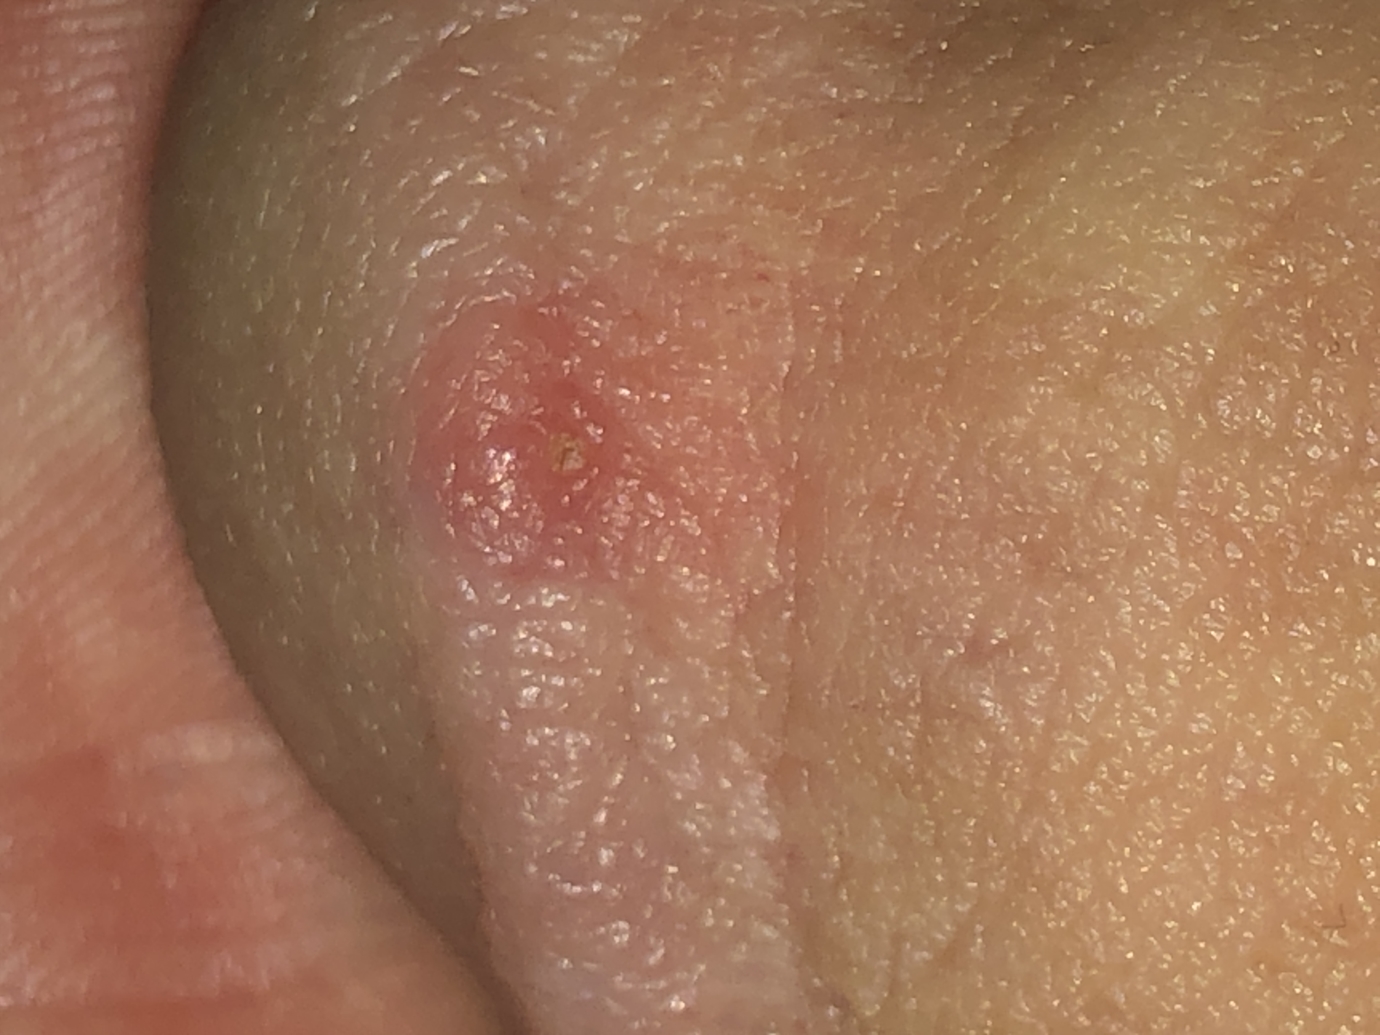 Red bump on penis head, worried it could be STD | Sexual Health Forums | Patient